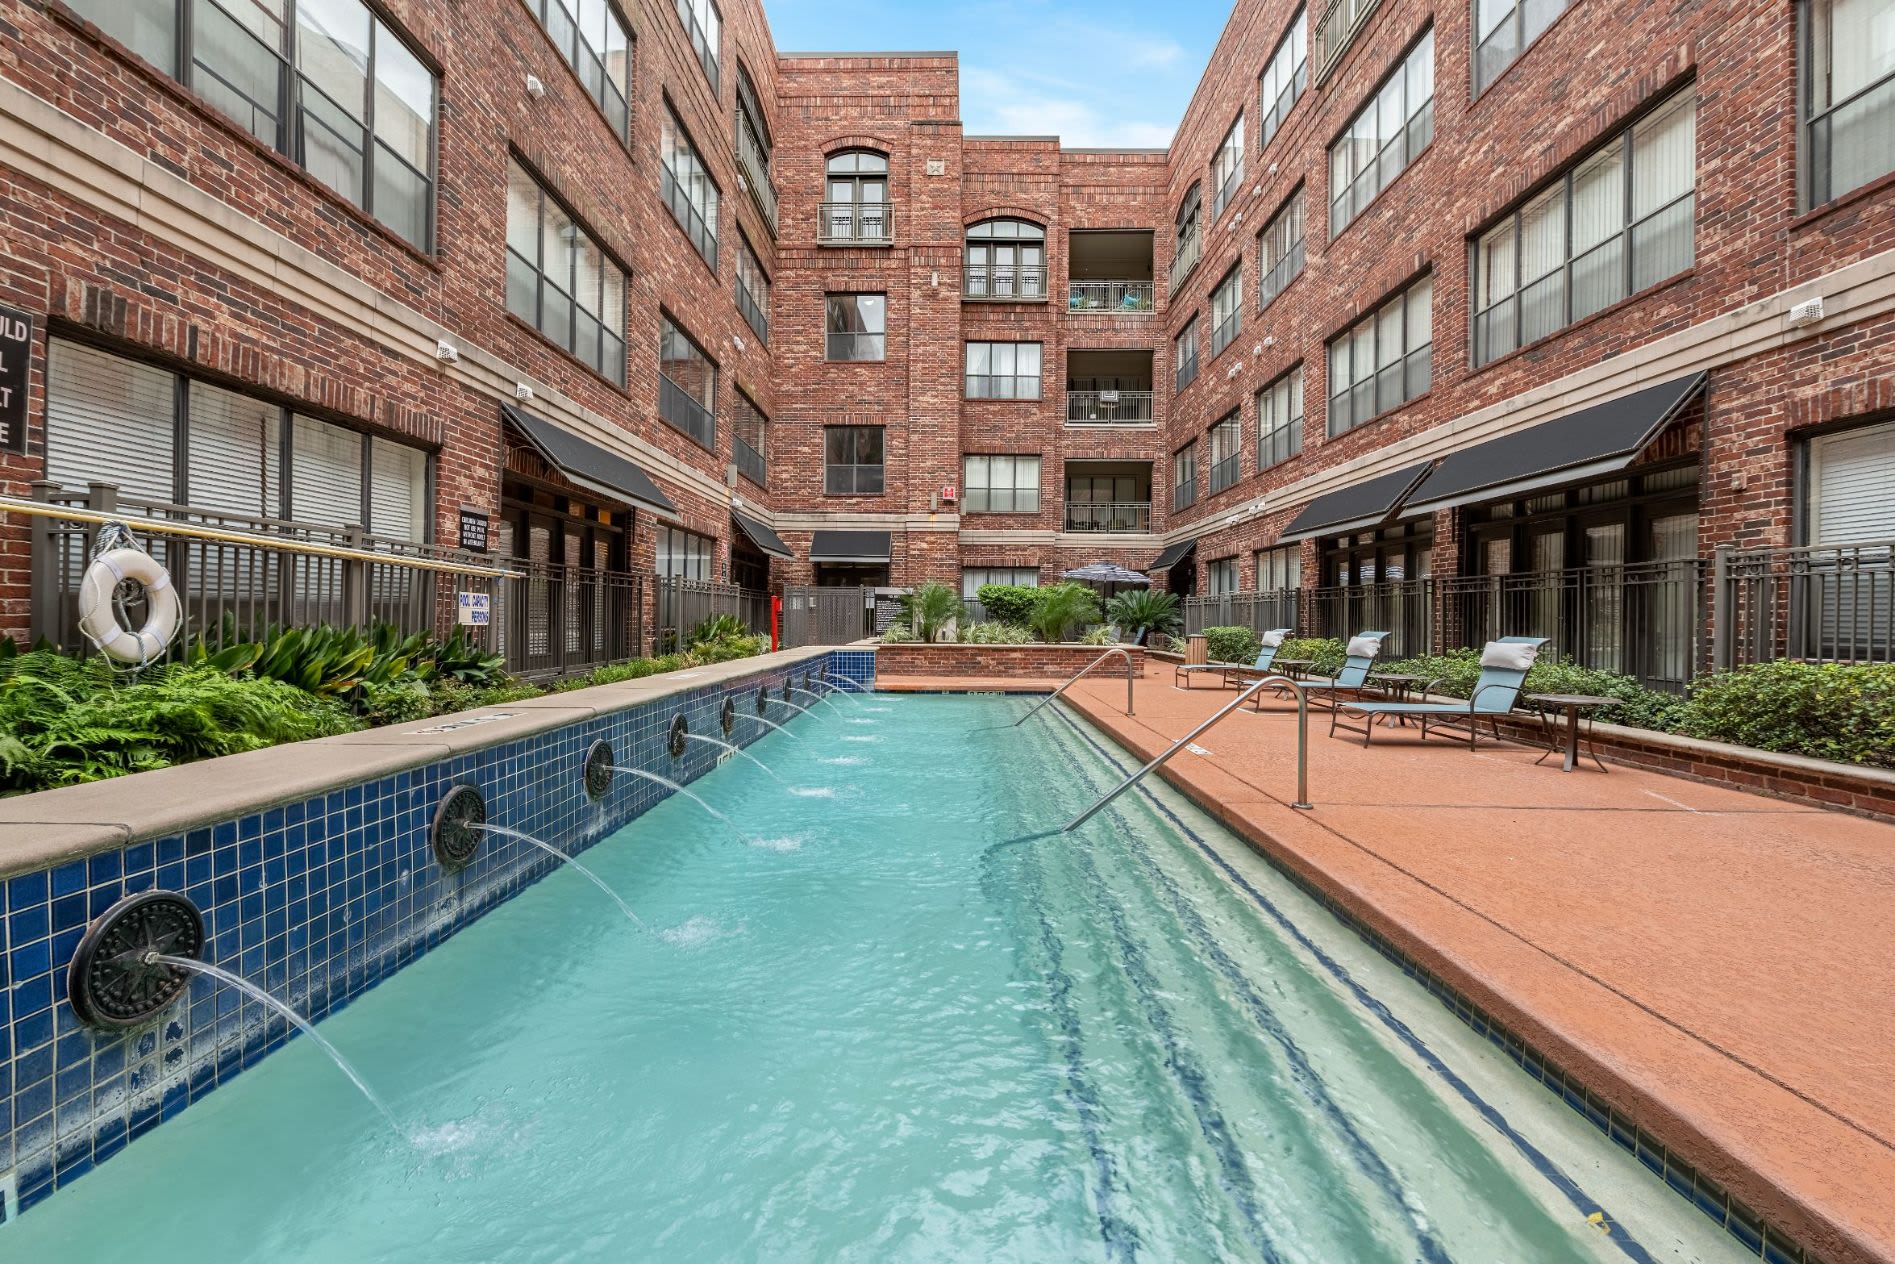 Sparkling pool with a water feature at Marquis Lofts on Sabine in Houston, Texas